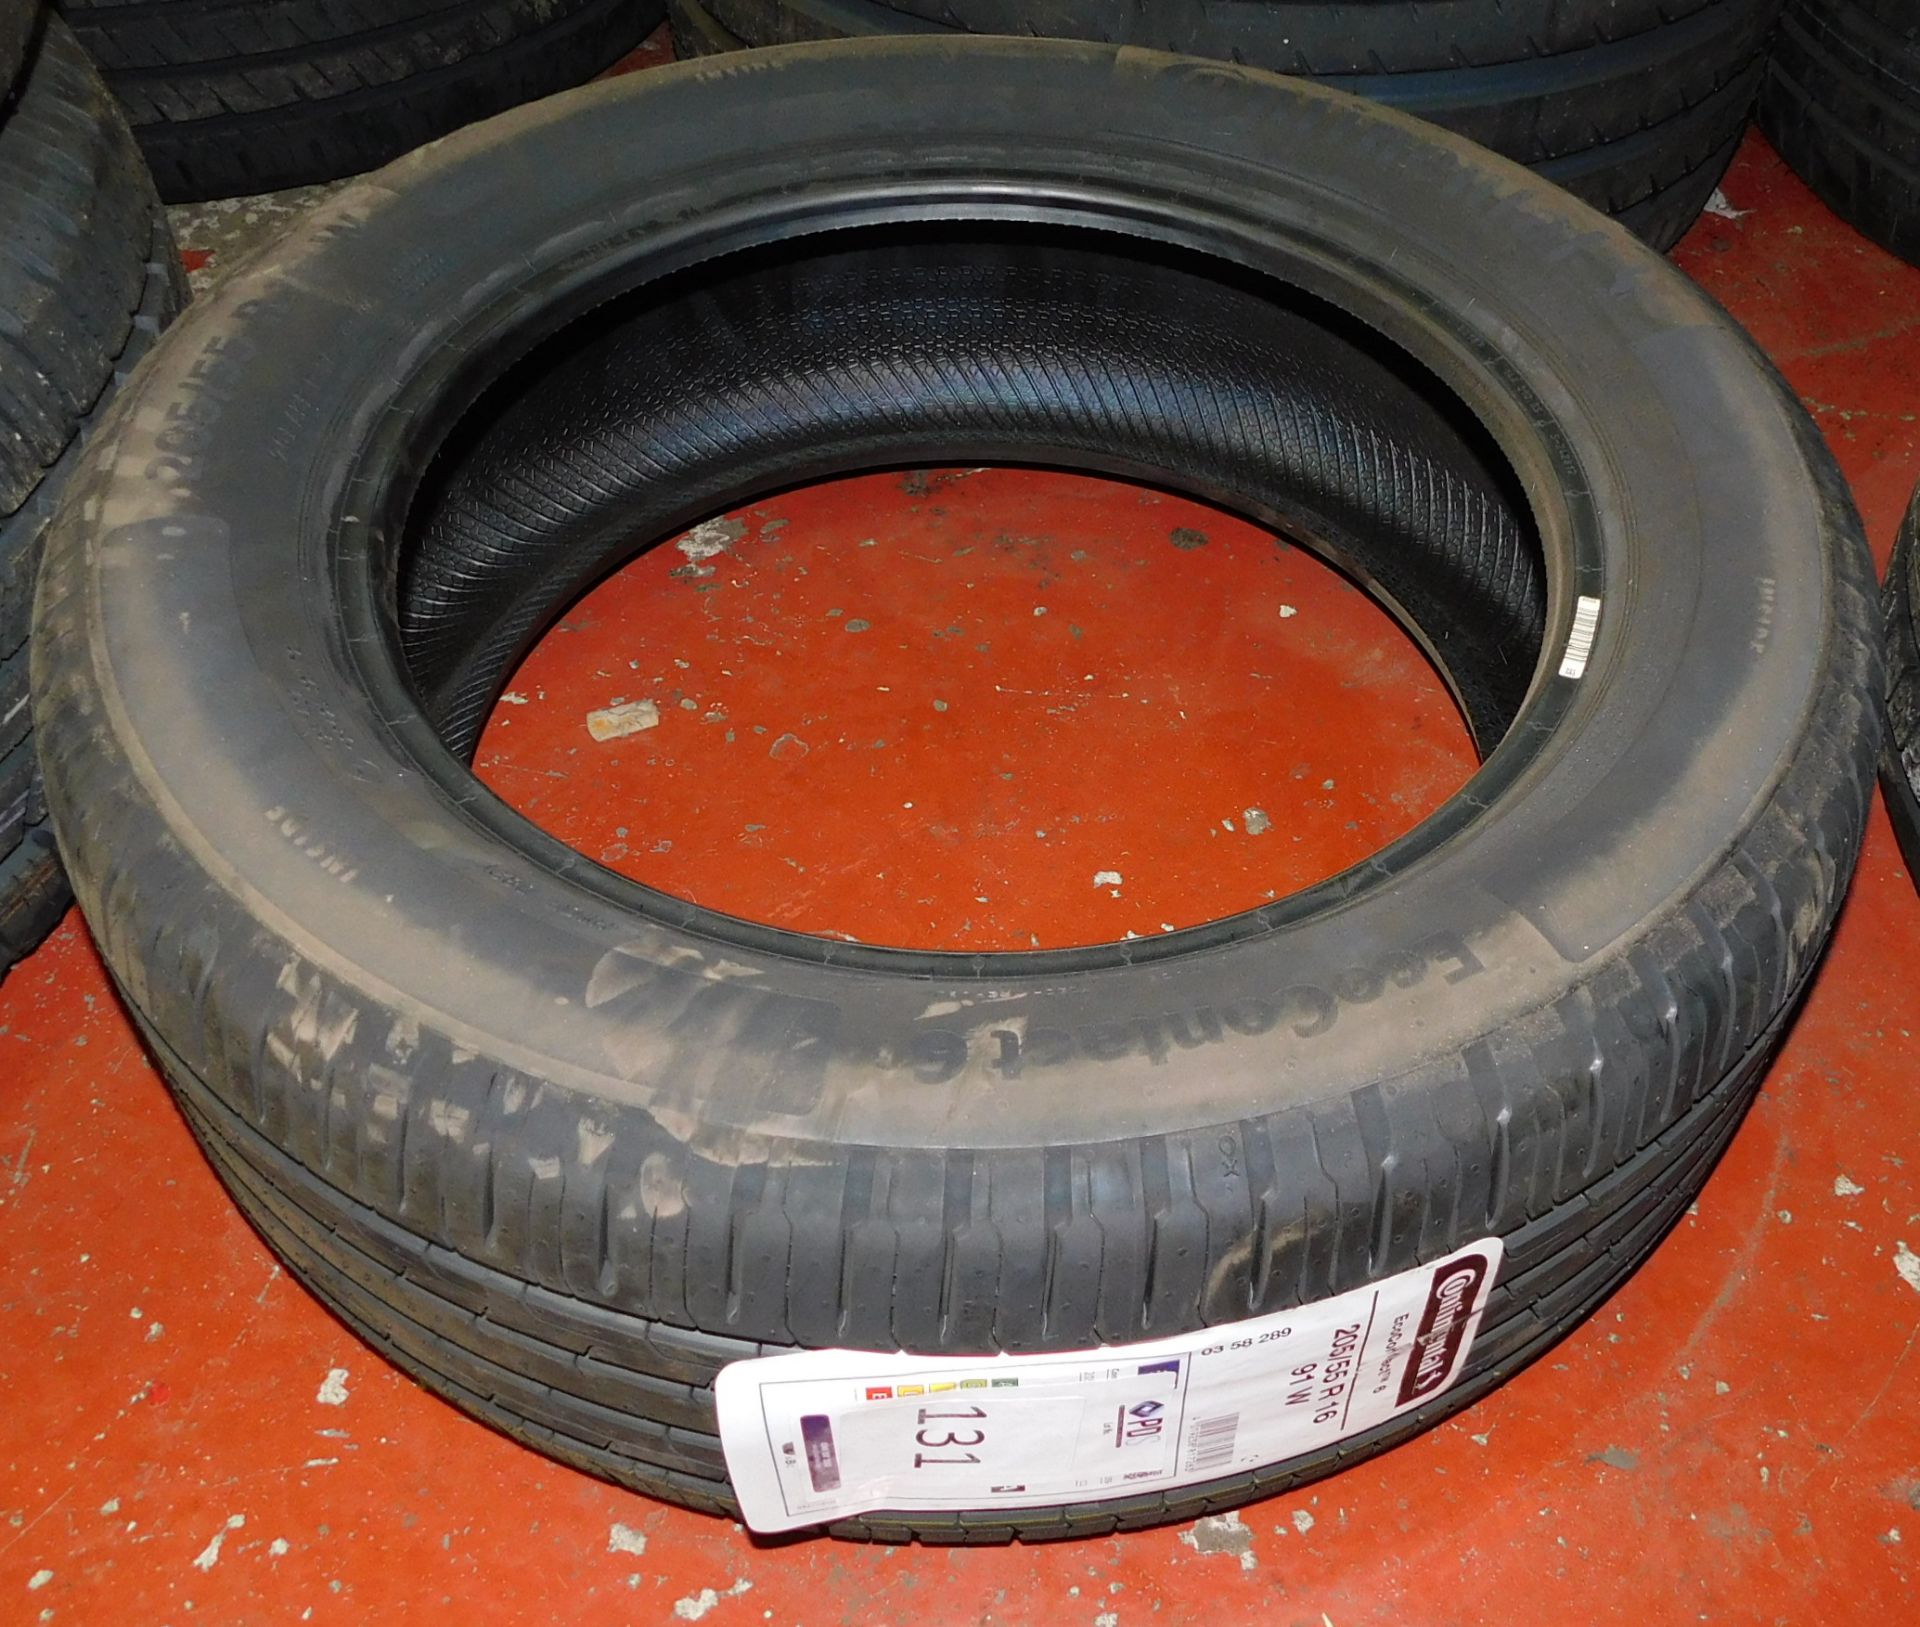 1 tyre, size 205/55 16 (1 Continental) (Location Northampton. Please Refer to General Notes)